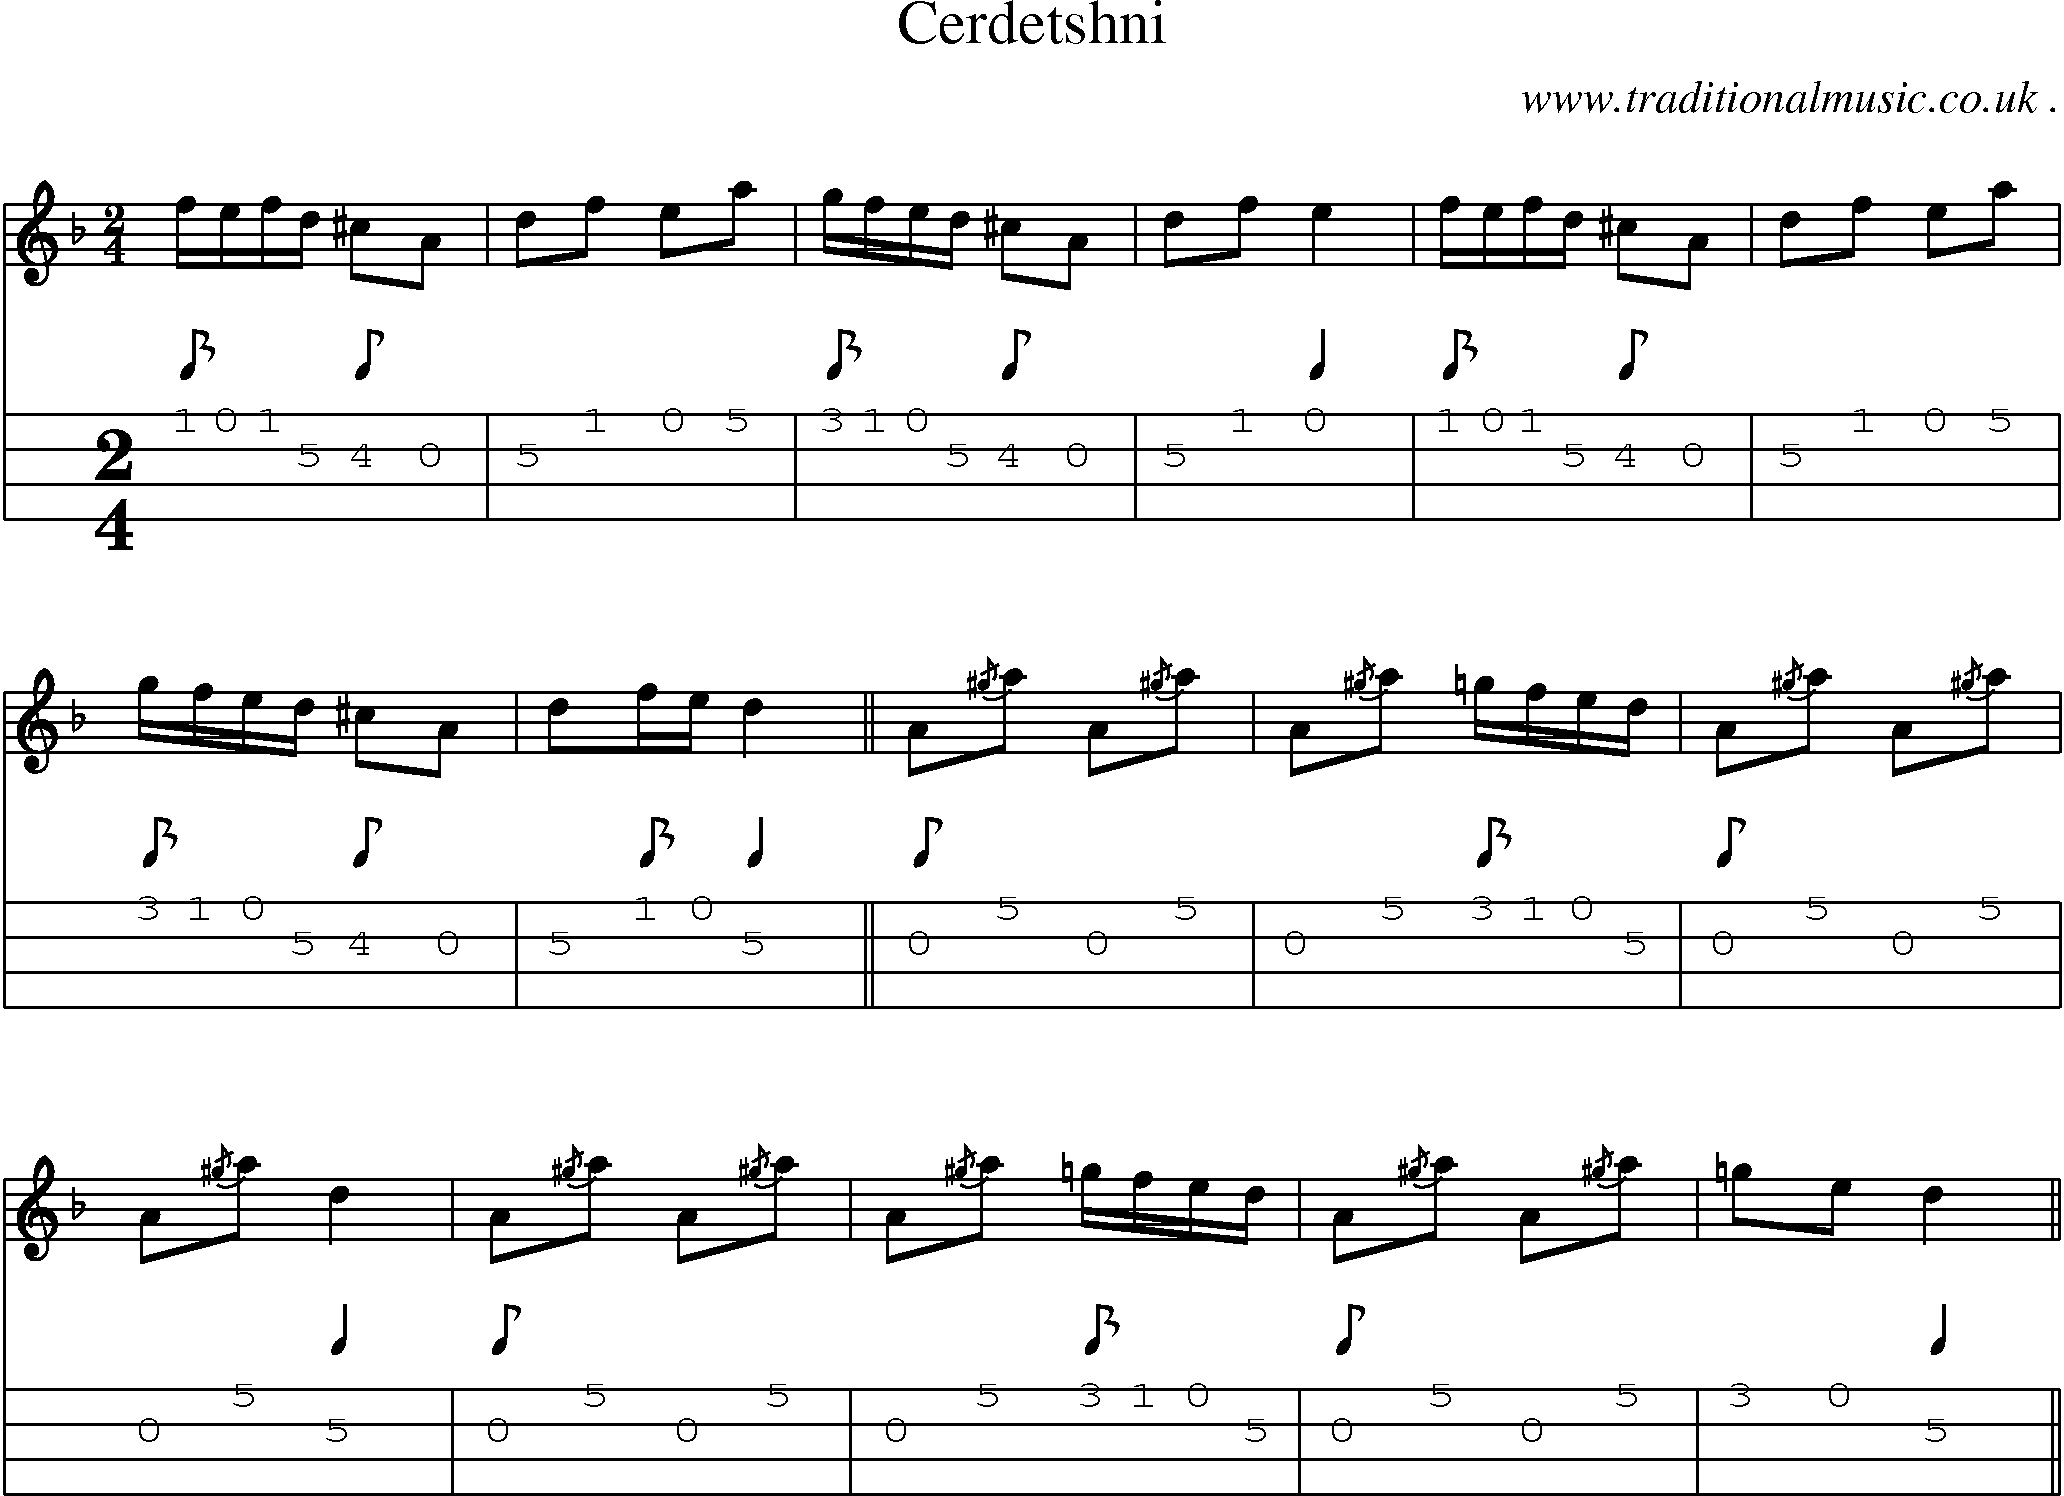 Music Score and Guitar Tabs for Cerdetshni